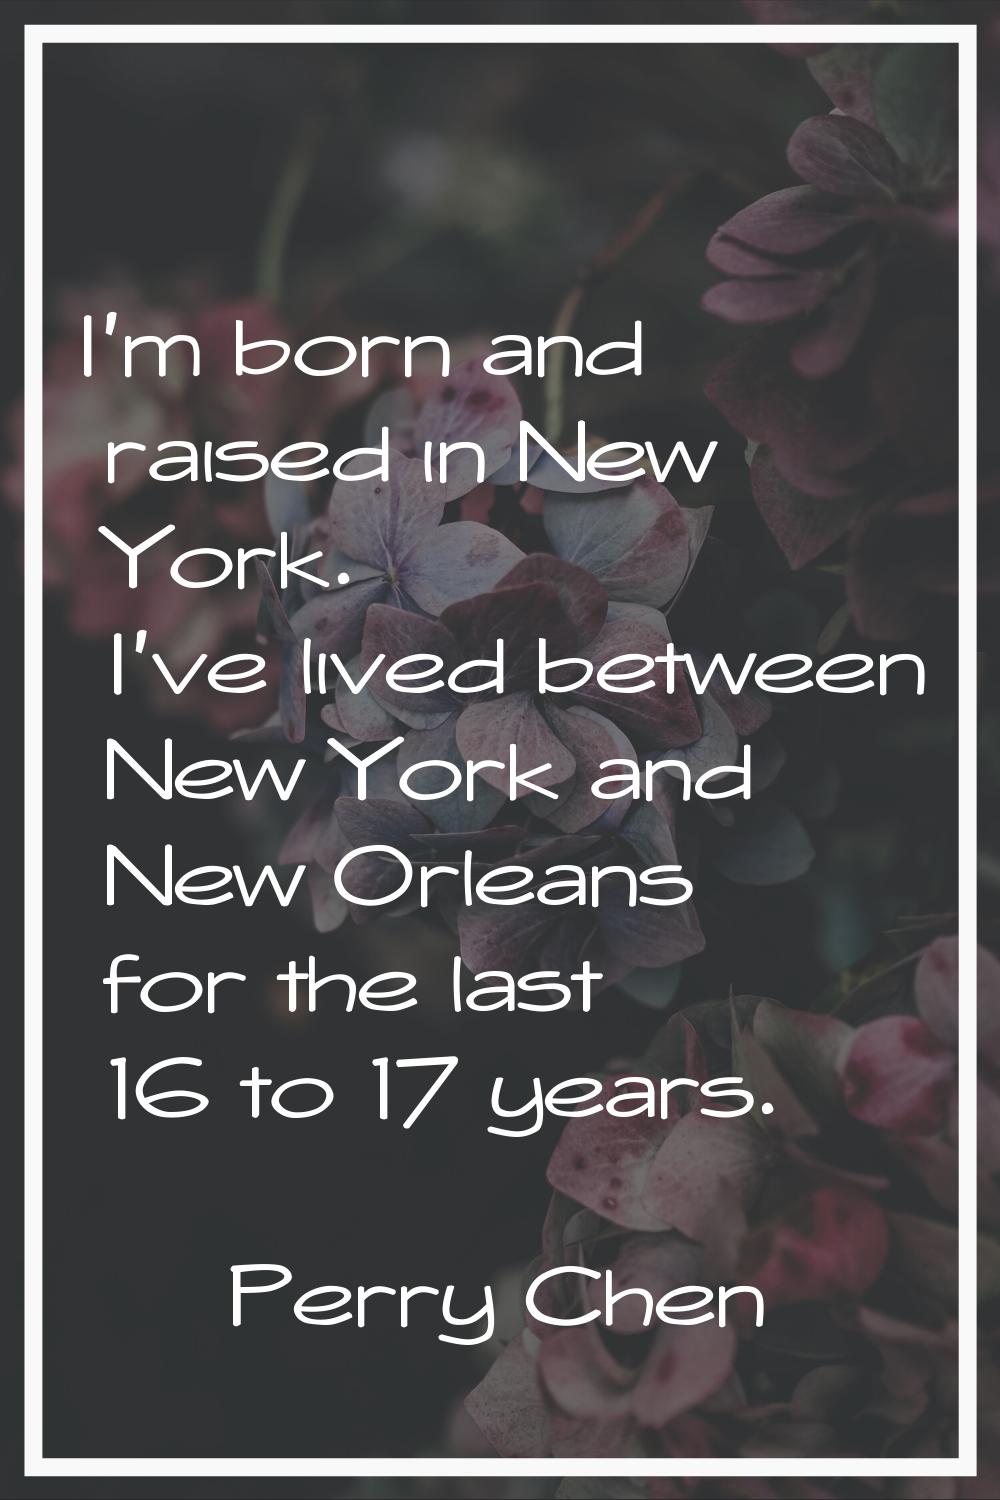 I'm born and raised in New York. I've lived between New York and New Orleans for the last 16 to 17 